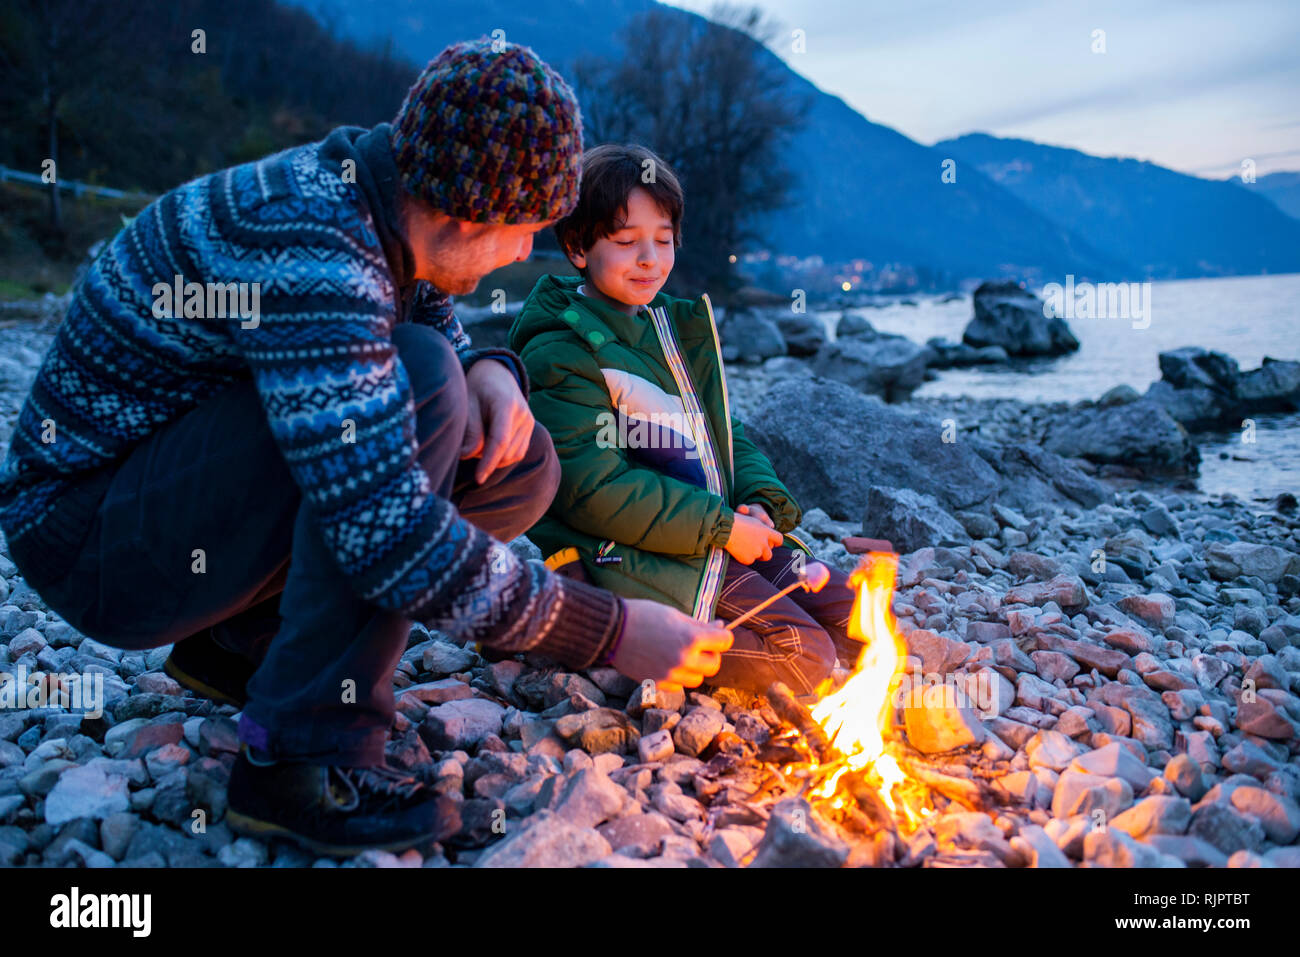 Father and son toasting marshmallows over campfire, Onno, Lombardy, Italy Stock Photo